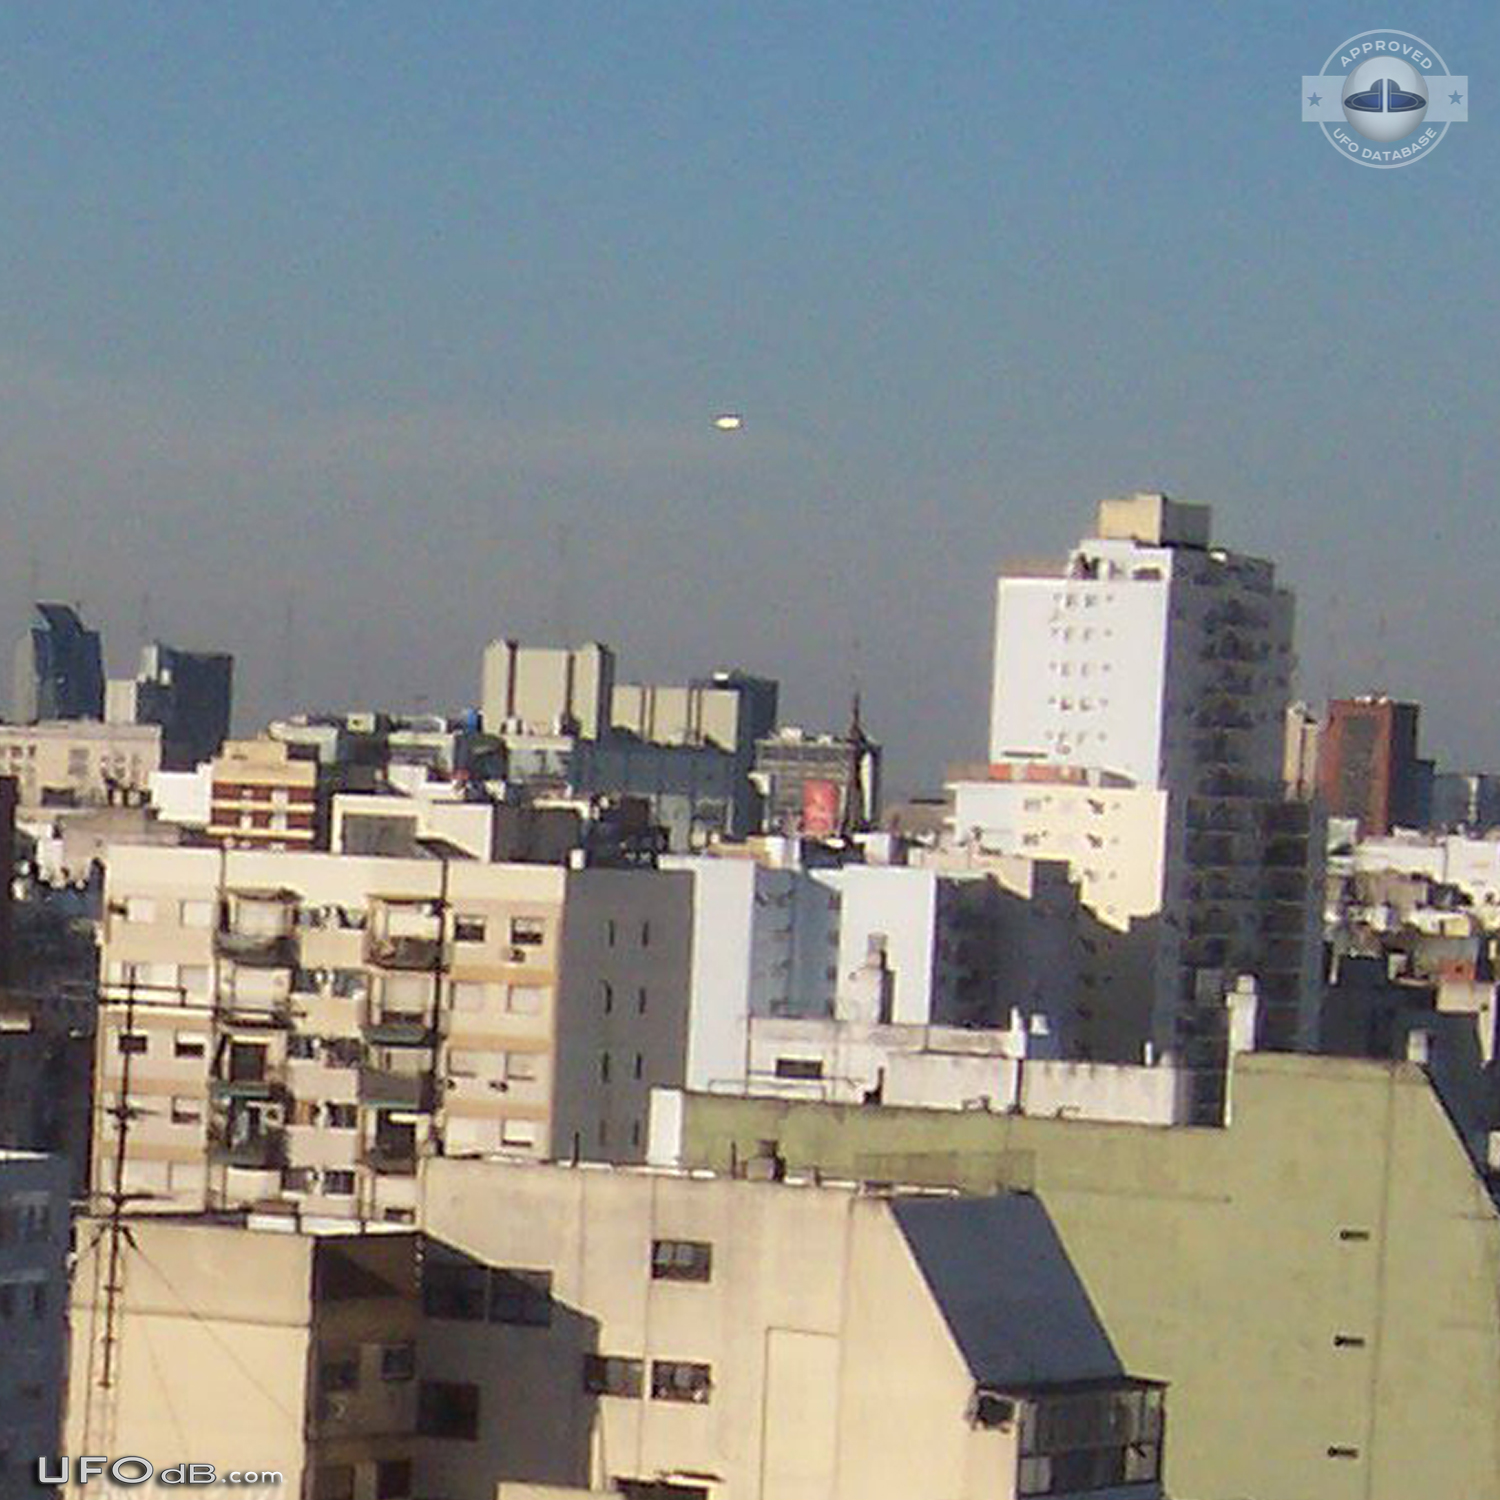 Friends Picture reveals UFO over Buenos Aires in Argentina May 2009 UFO Picture #607-3